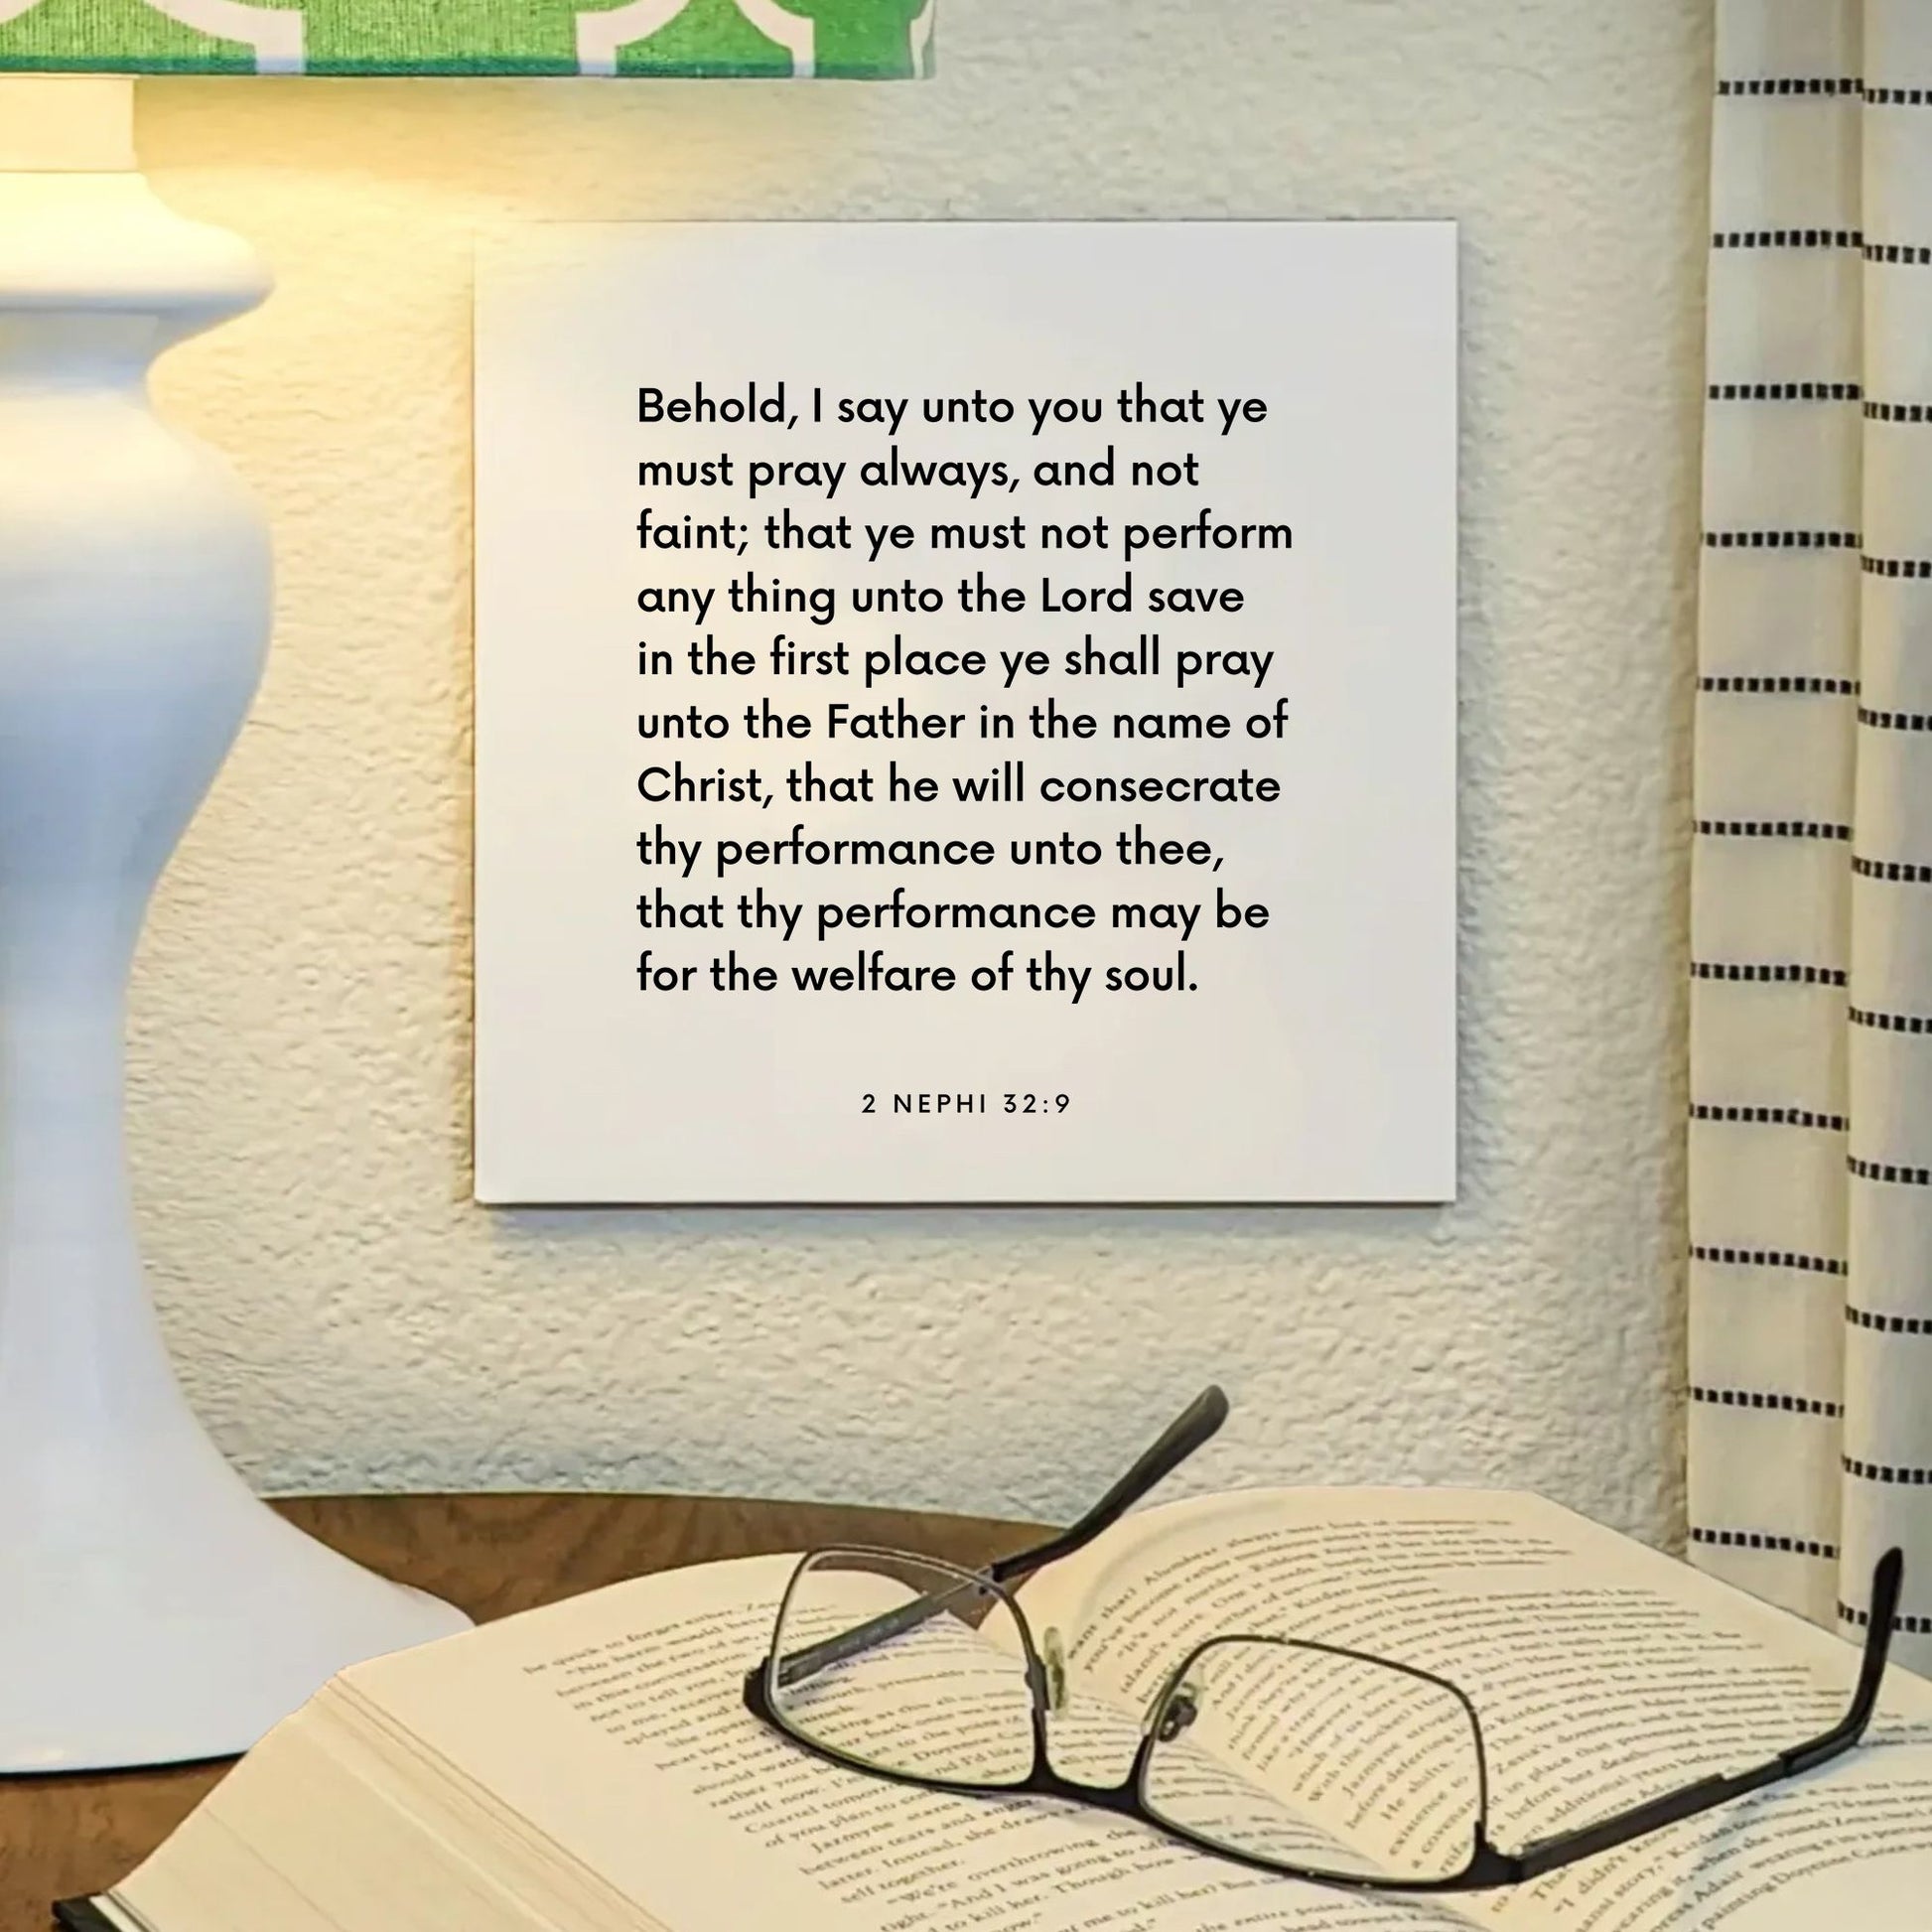 Lamp mouting of the scripture tile for 2 Nephi 32:9 - "Ye must pray always, and not faint"